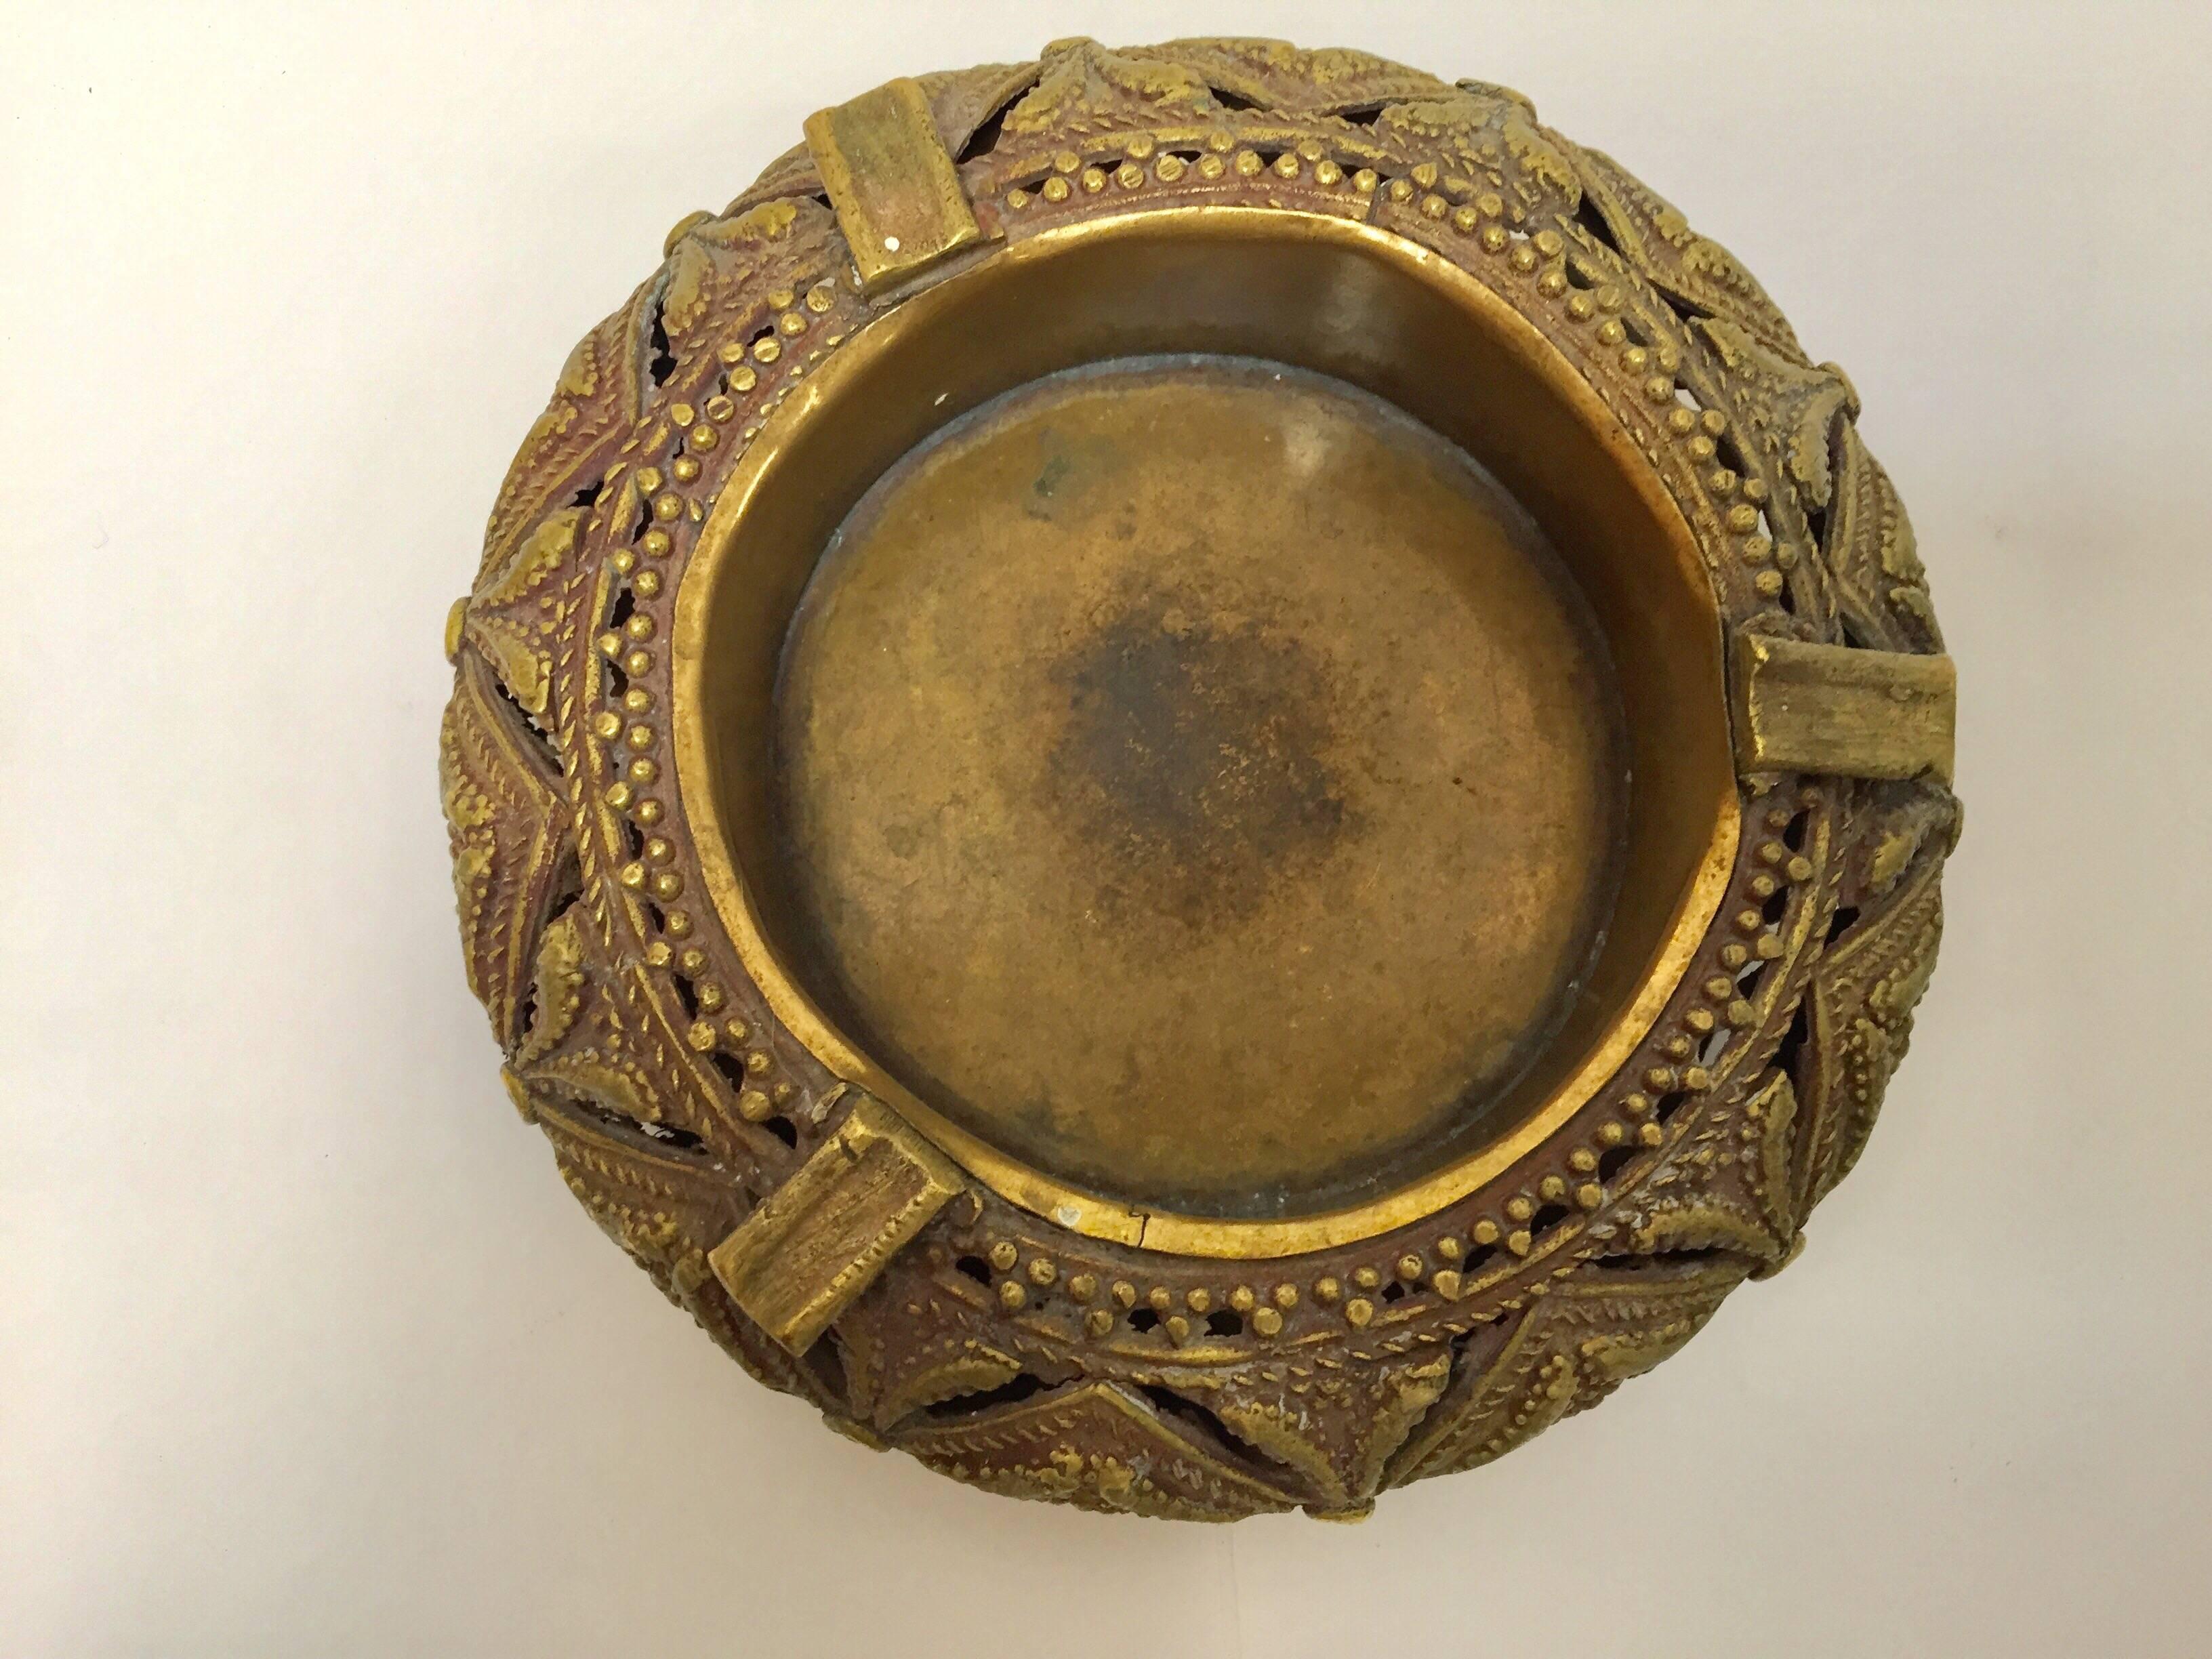 Cast Pair of Round Handcrafted Brass Ashtrays For Sale